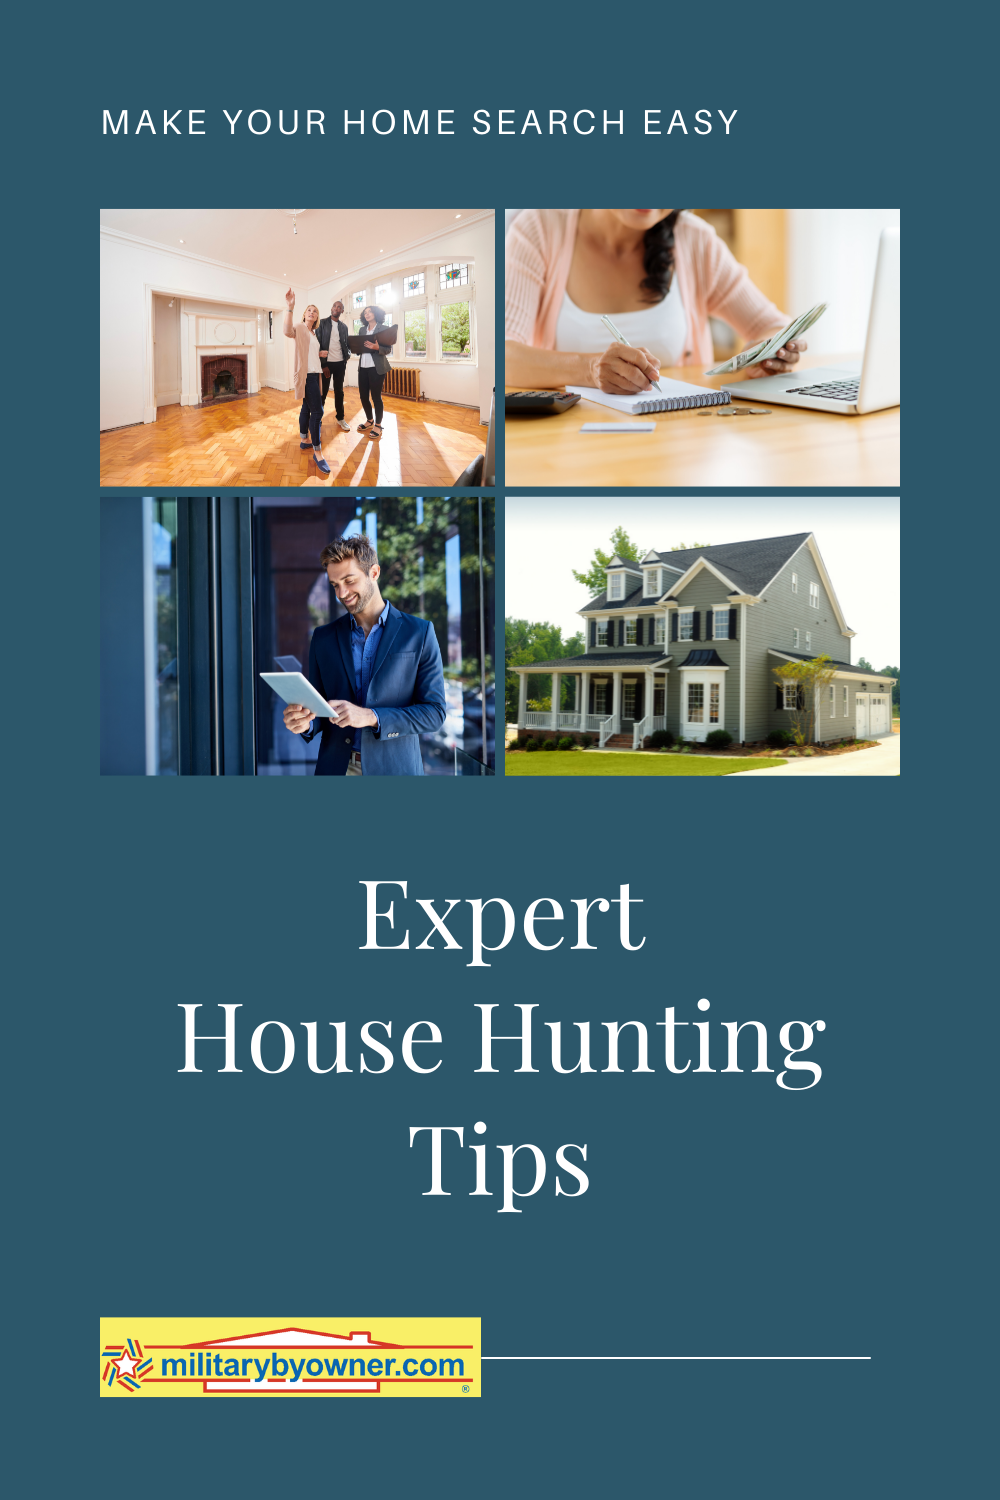 Househunting_Tips_2